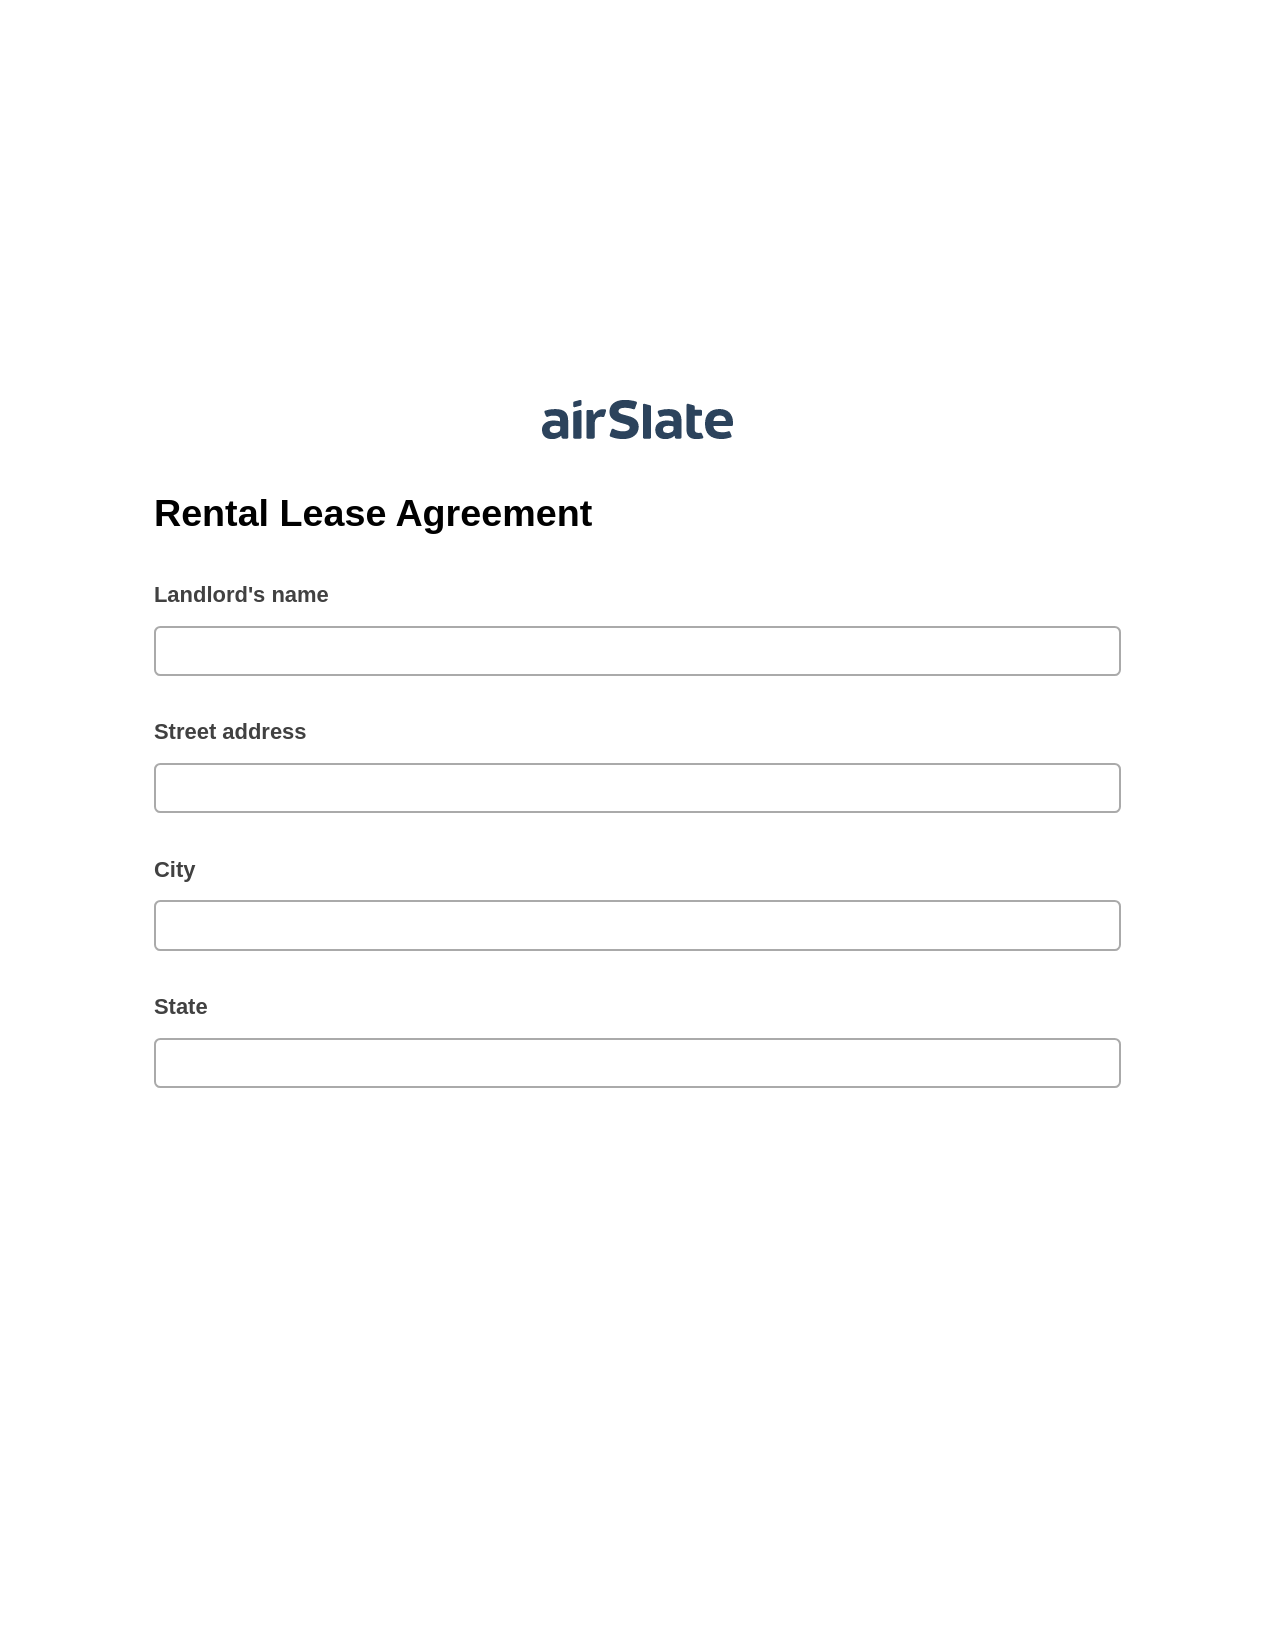 Rental Lease Agreement Pre-fill from Excel Spreadsheet Dropdown Options Bot, Invoke Salesforce Process Bot, Export to NetSuite Record Bot